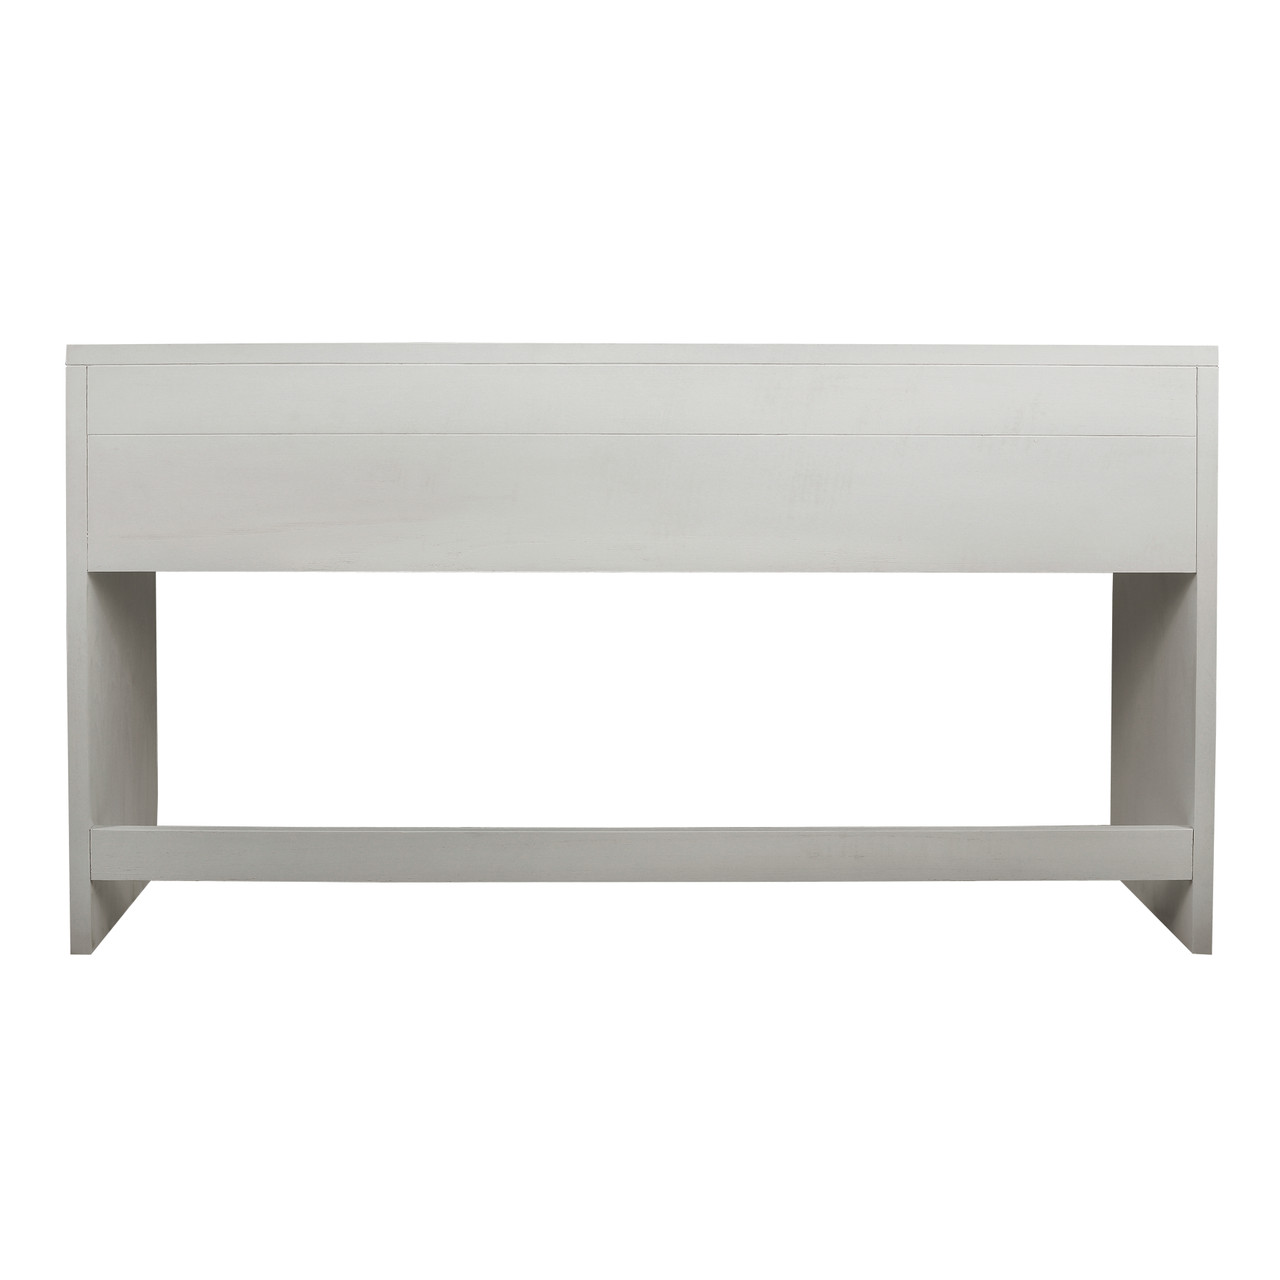 ELK HOME S0075-9860 Checkmate Waterfall Console Table - Checkmate White